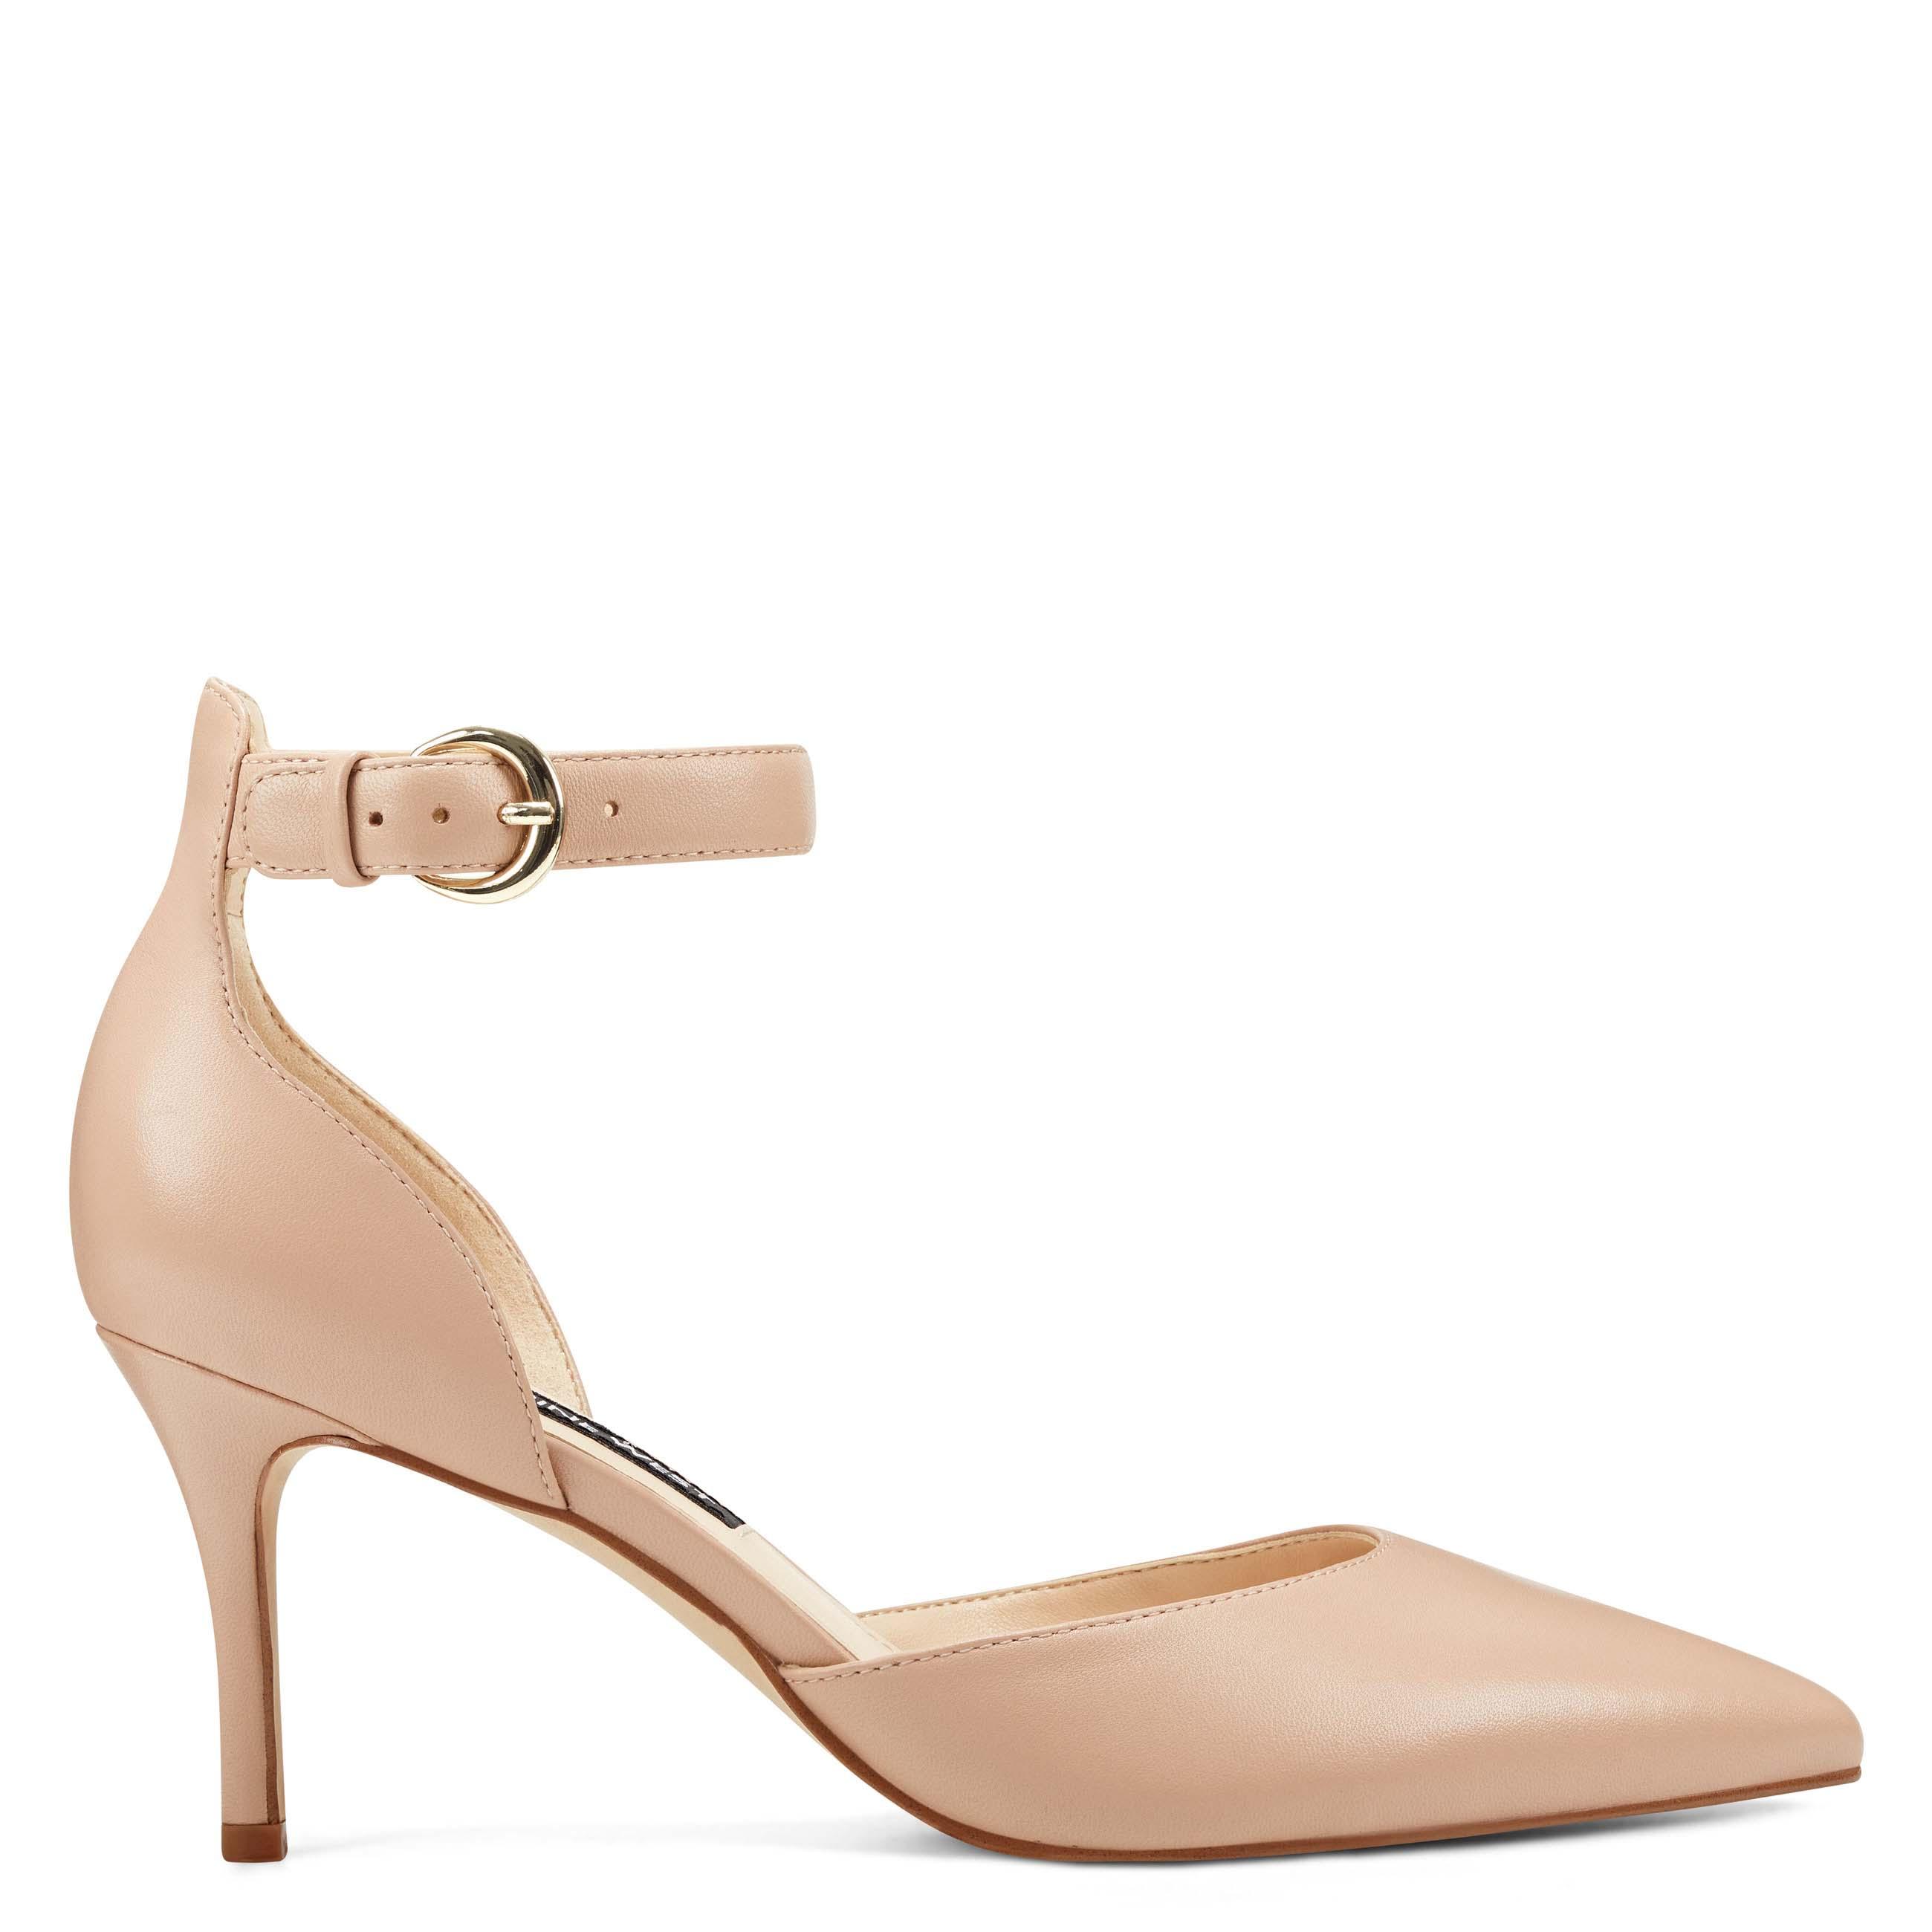 Nine West Mae Ankle Strap Pumps in Natural - Lyst